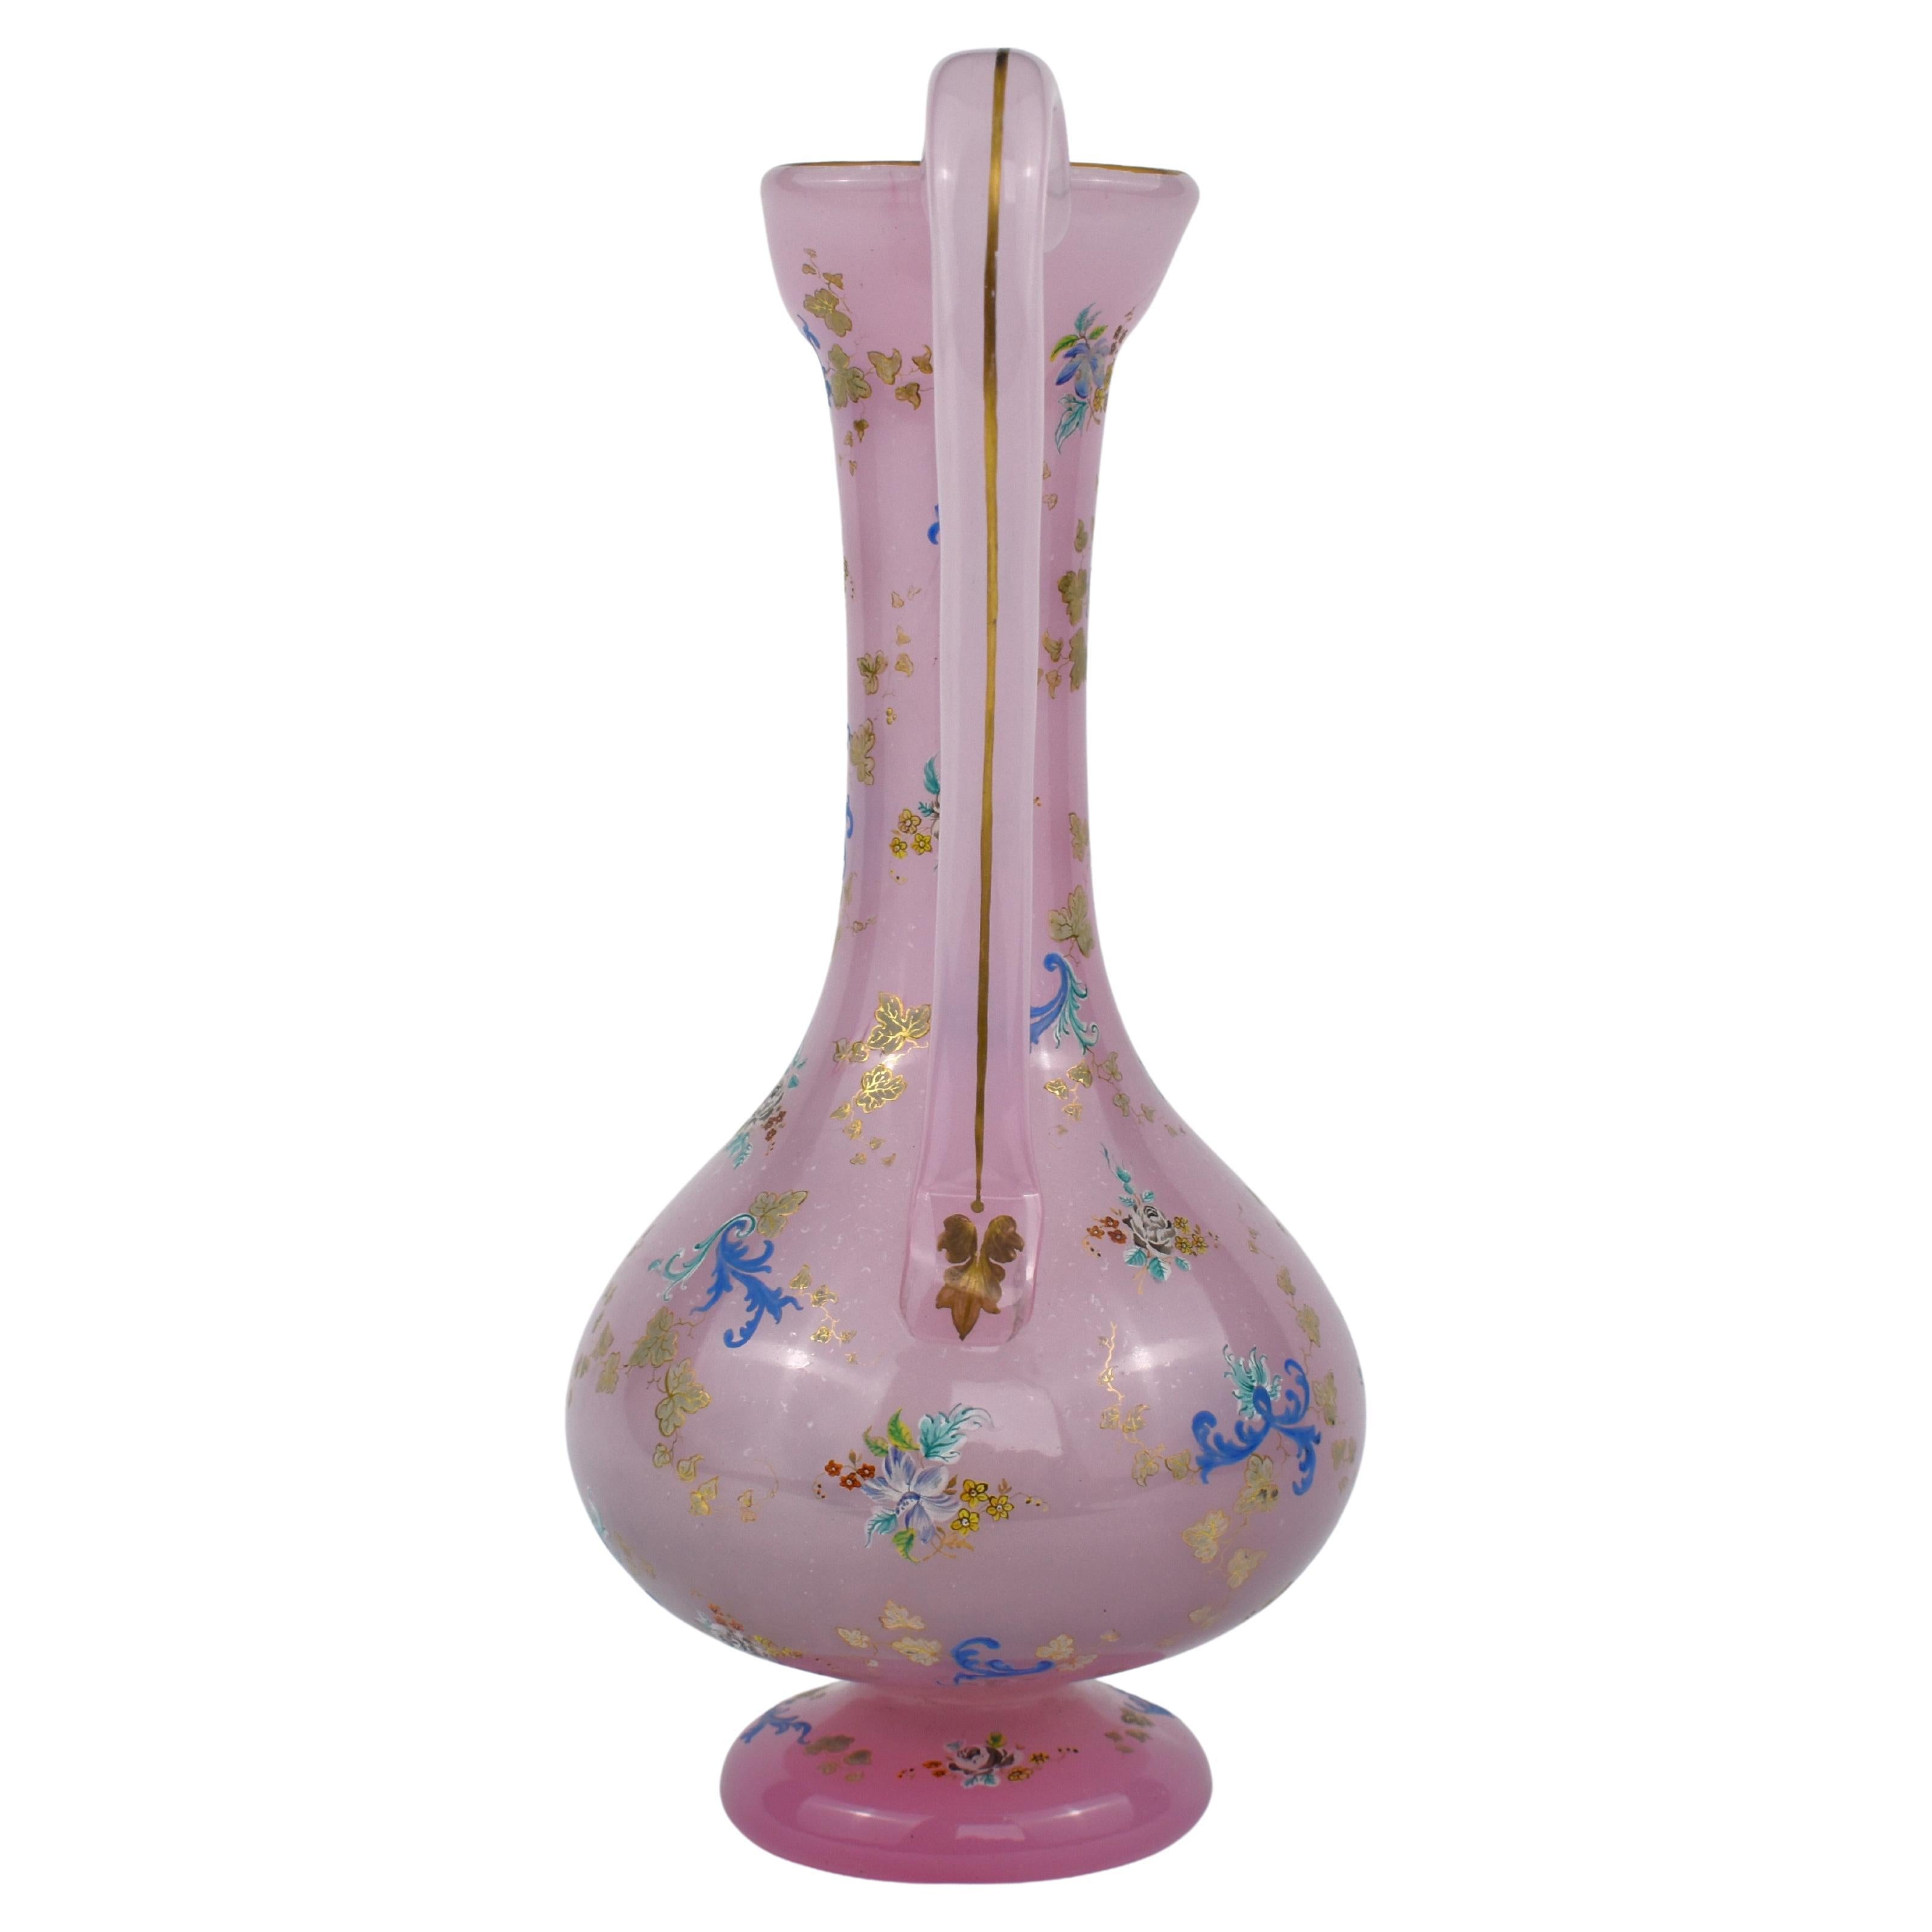 Antique Bohemian Opaline Moser Enamelled Glass Vase, 19th Century In Good Condition For Sale In Rostock, MV